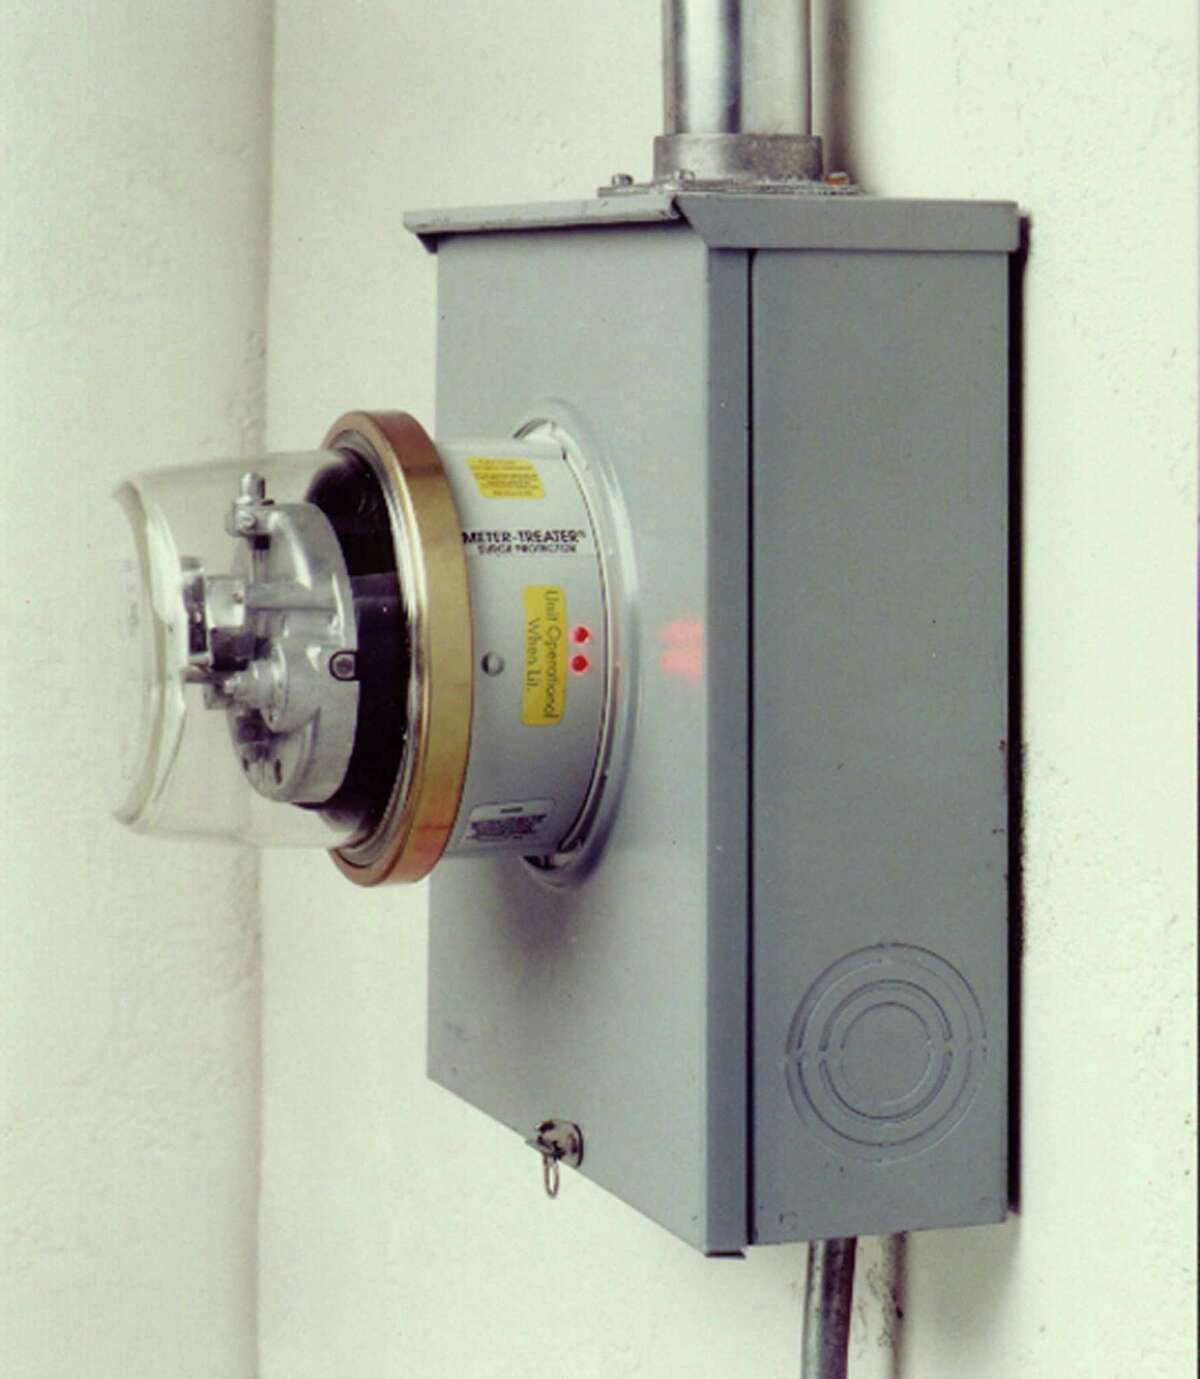 An electric meter.